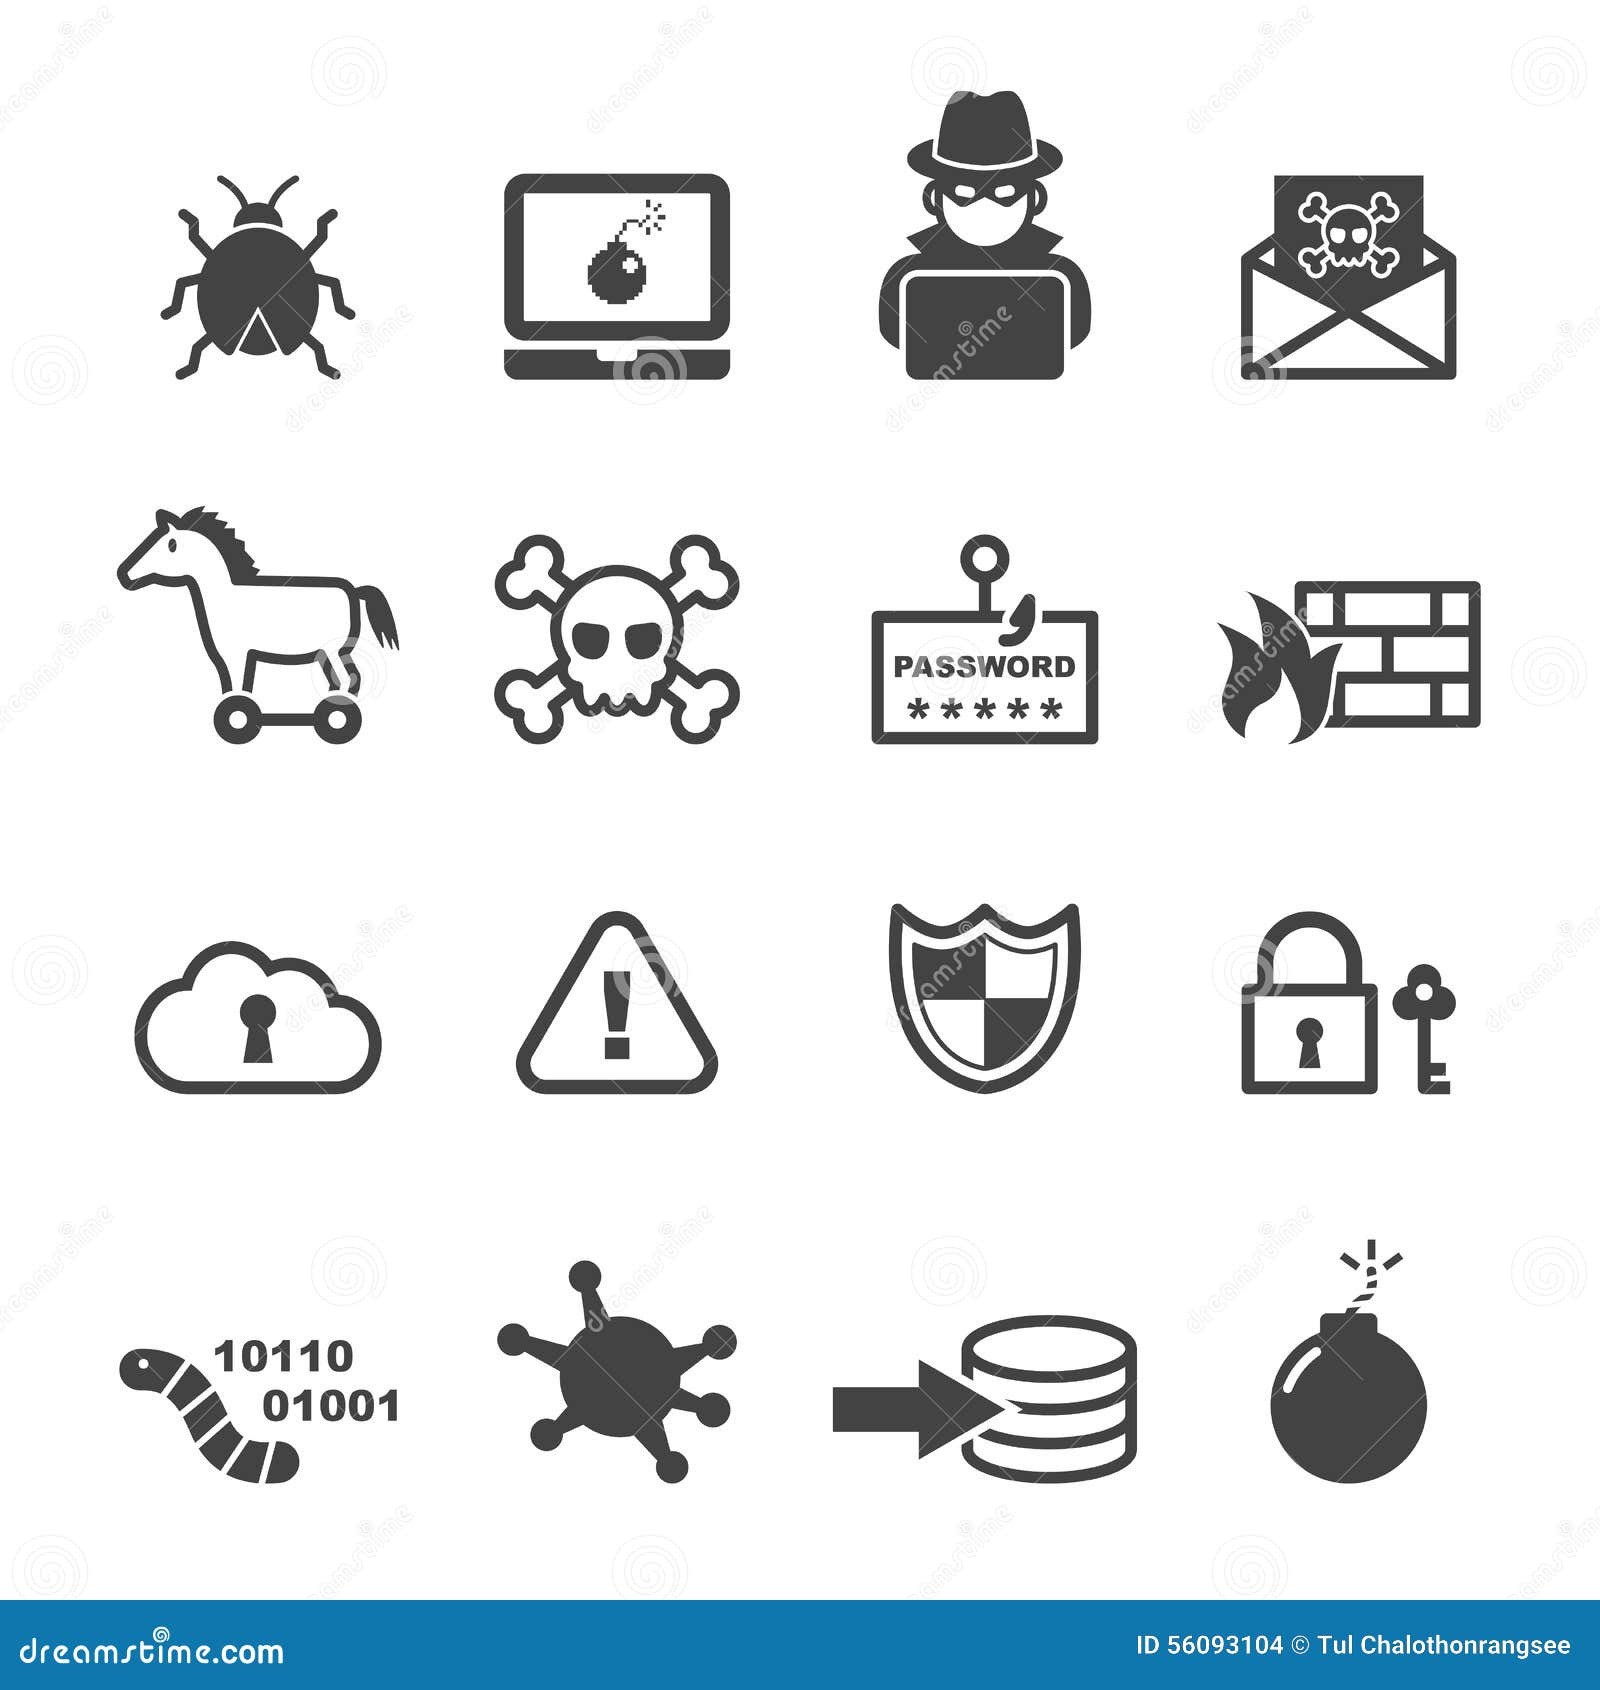 cyber security clipart free - photo #41